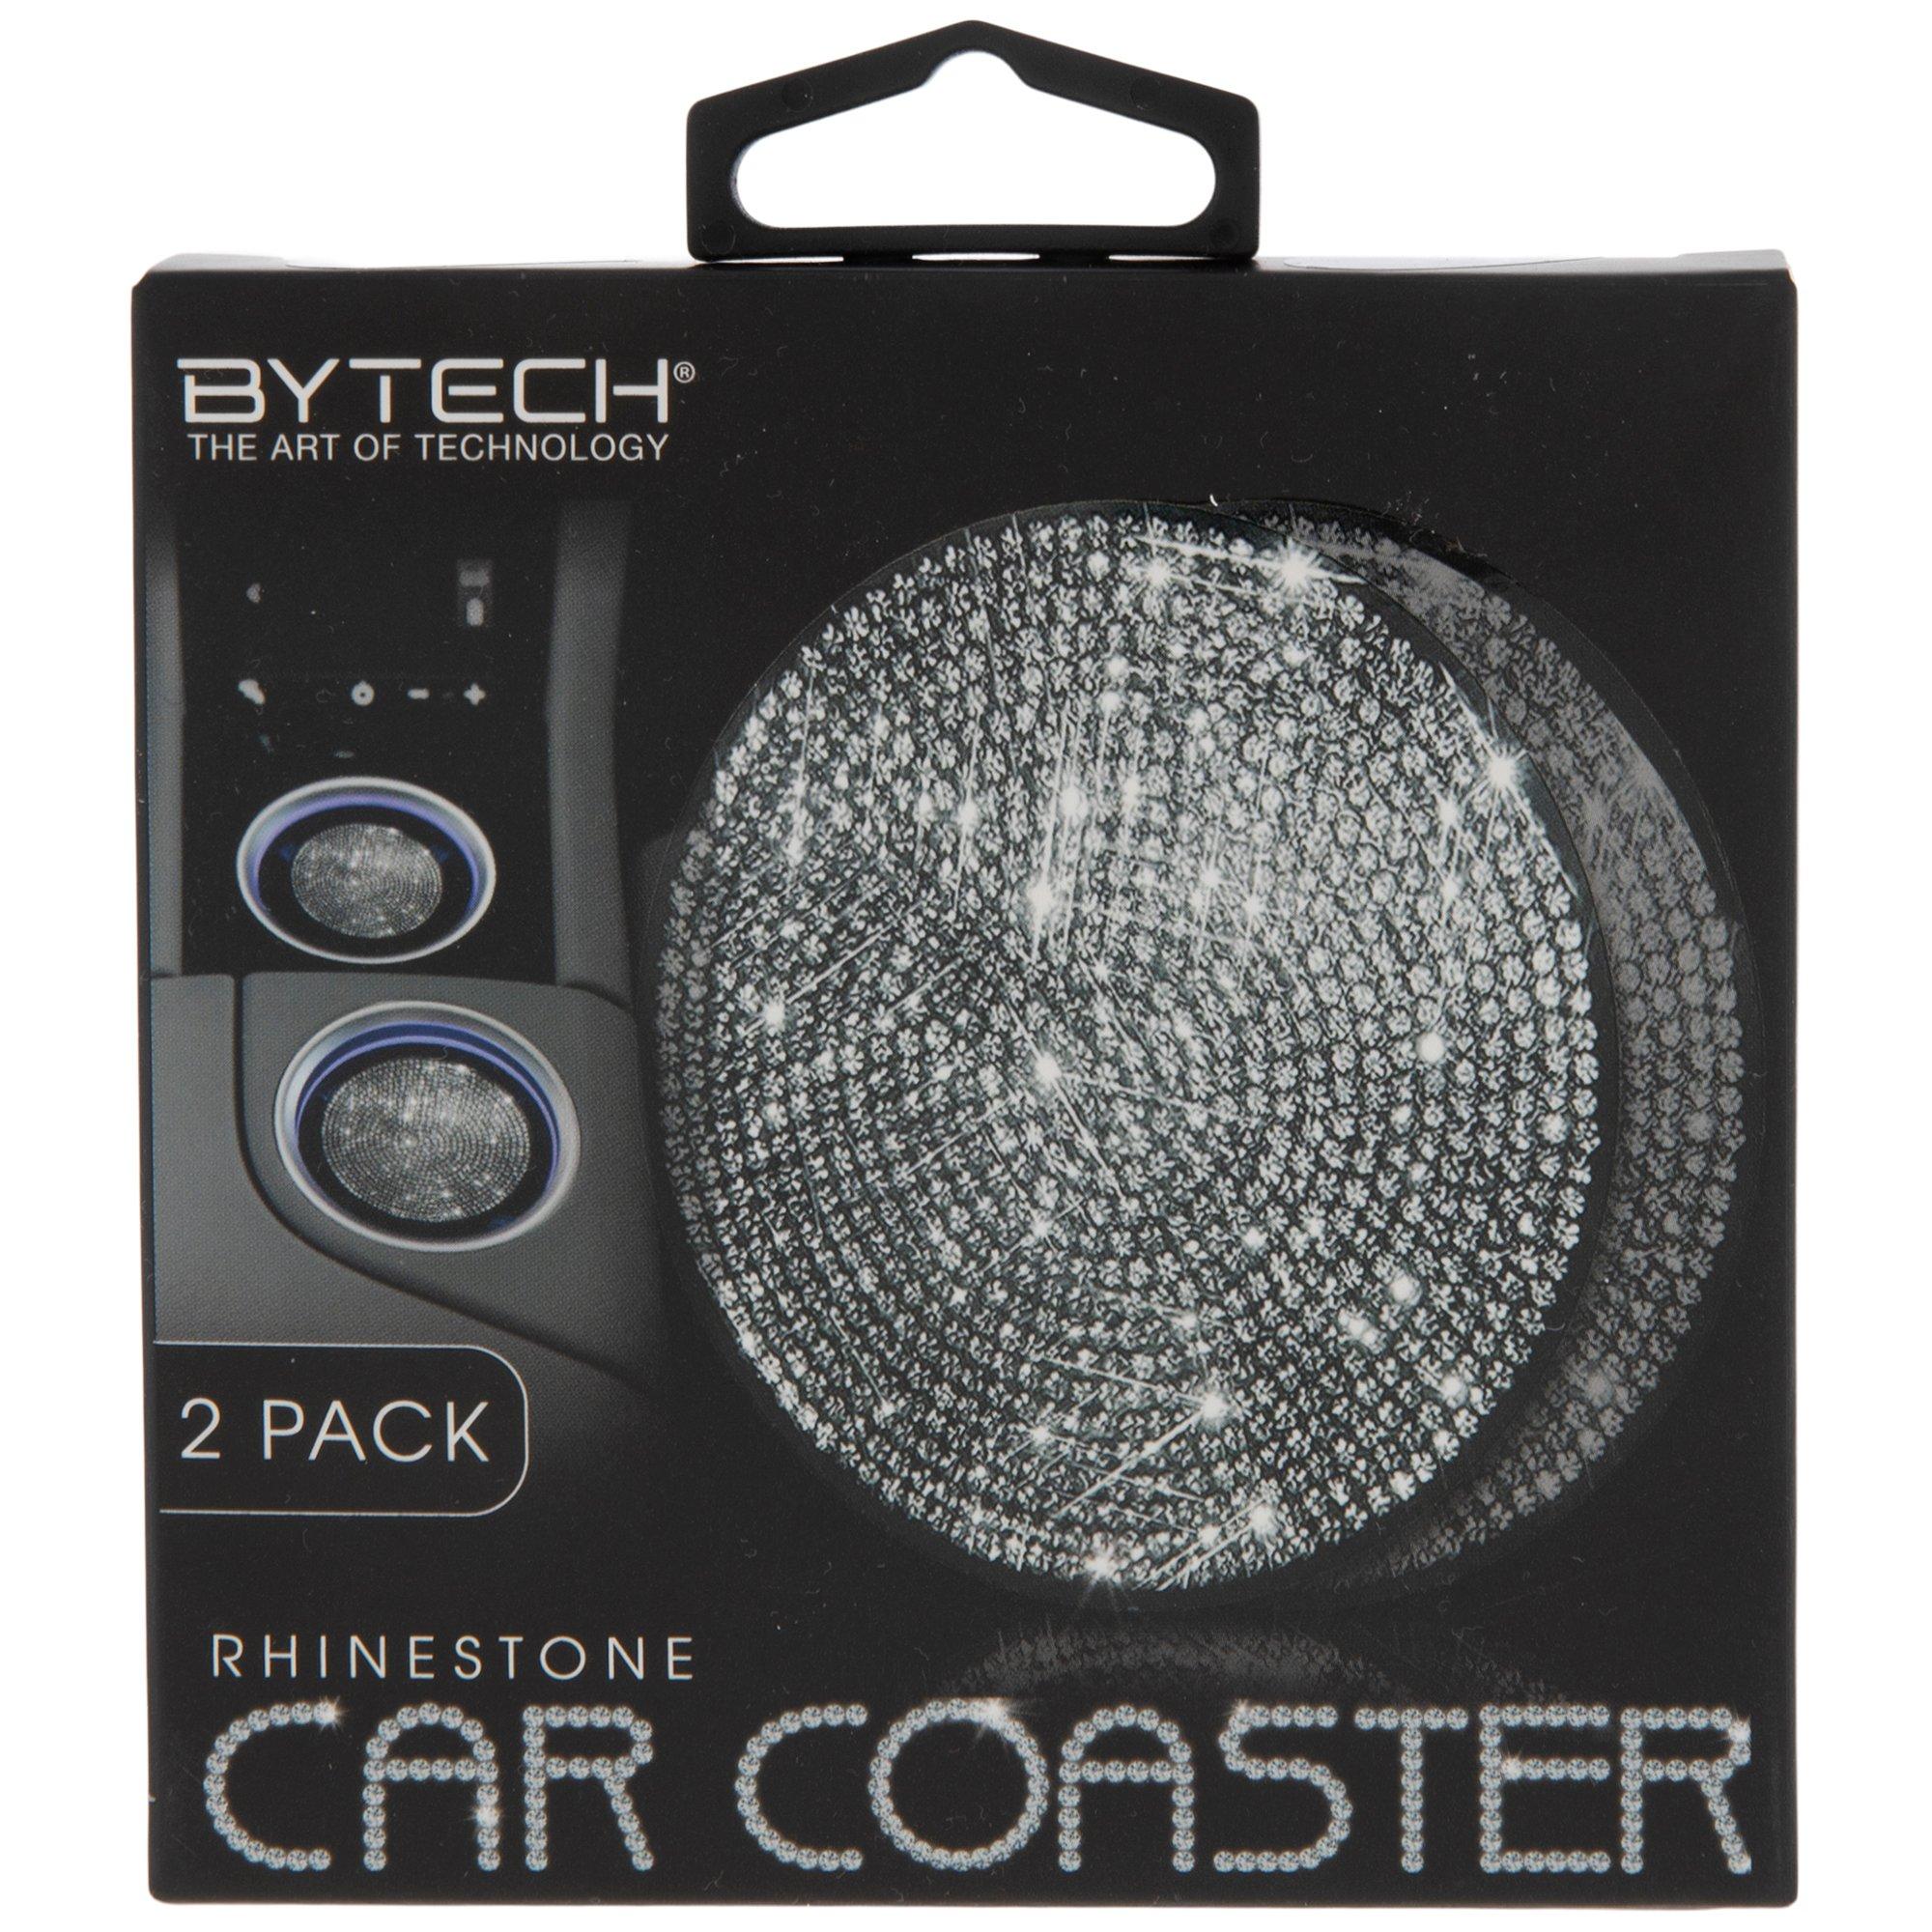 OSIRCAI 2 Pack Bling Car Coasters, 2.75 Inch Crystal Soft Rubber